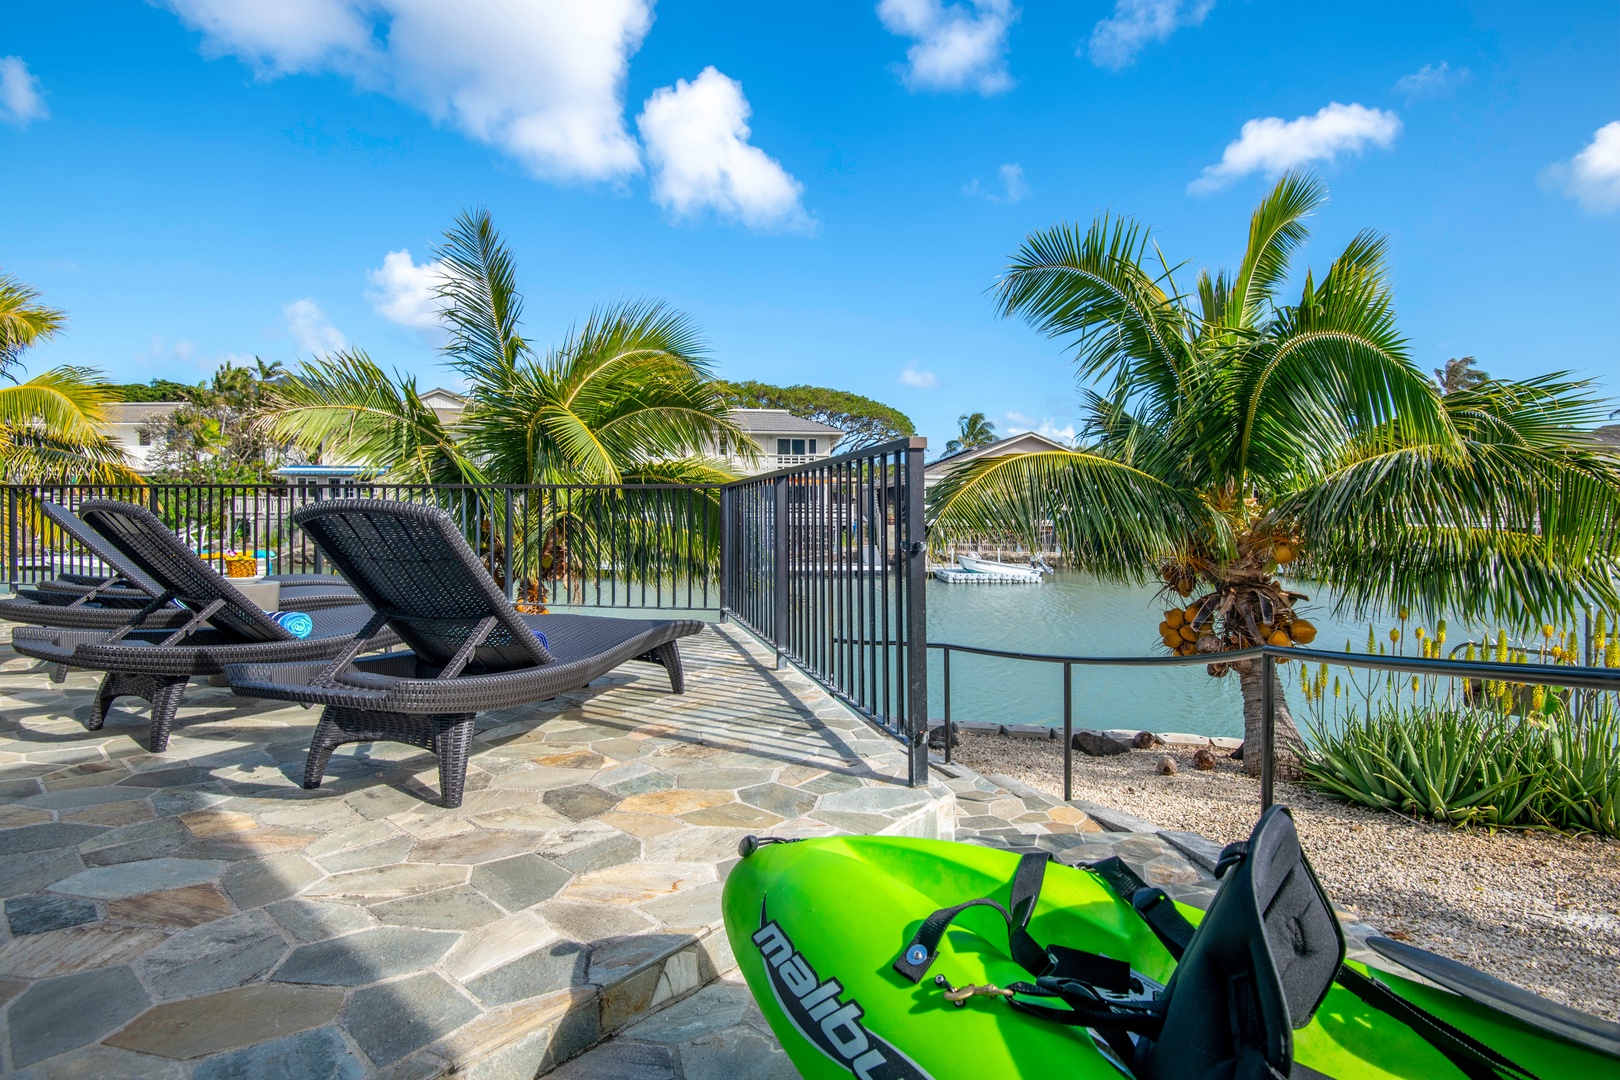 Honolulu Vacation Rentals, Holoholo Hale - Grab the kayak and paddle around the marina, or out to the ocean! (Also included are a couple stand up paddle boards!)